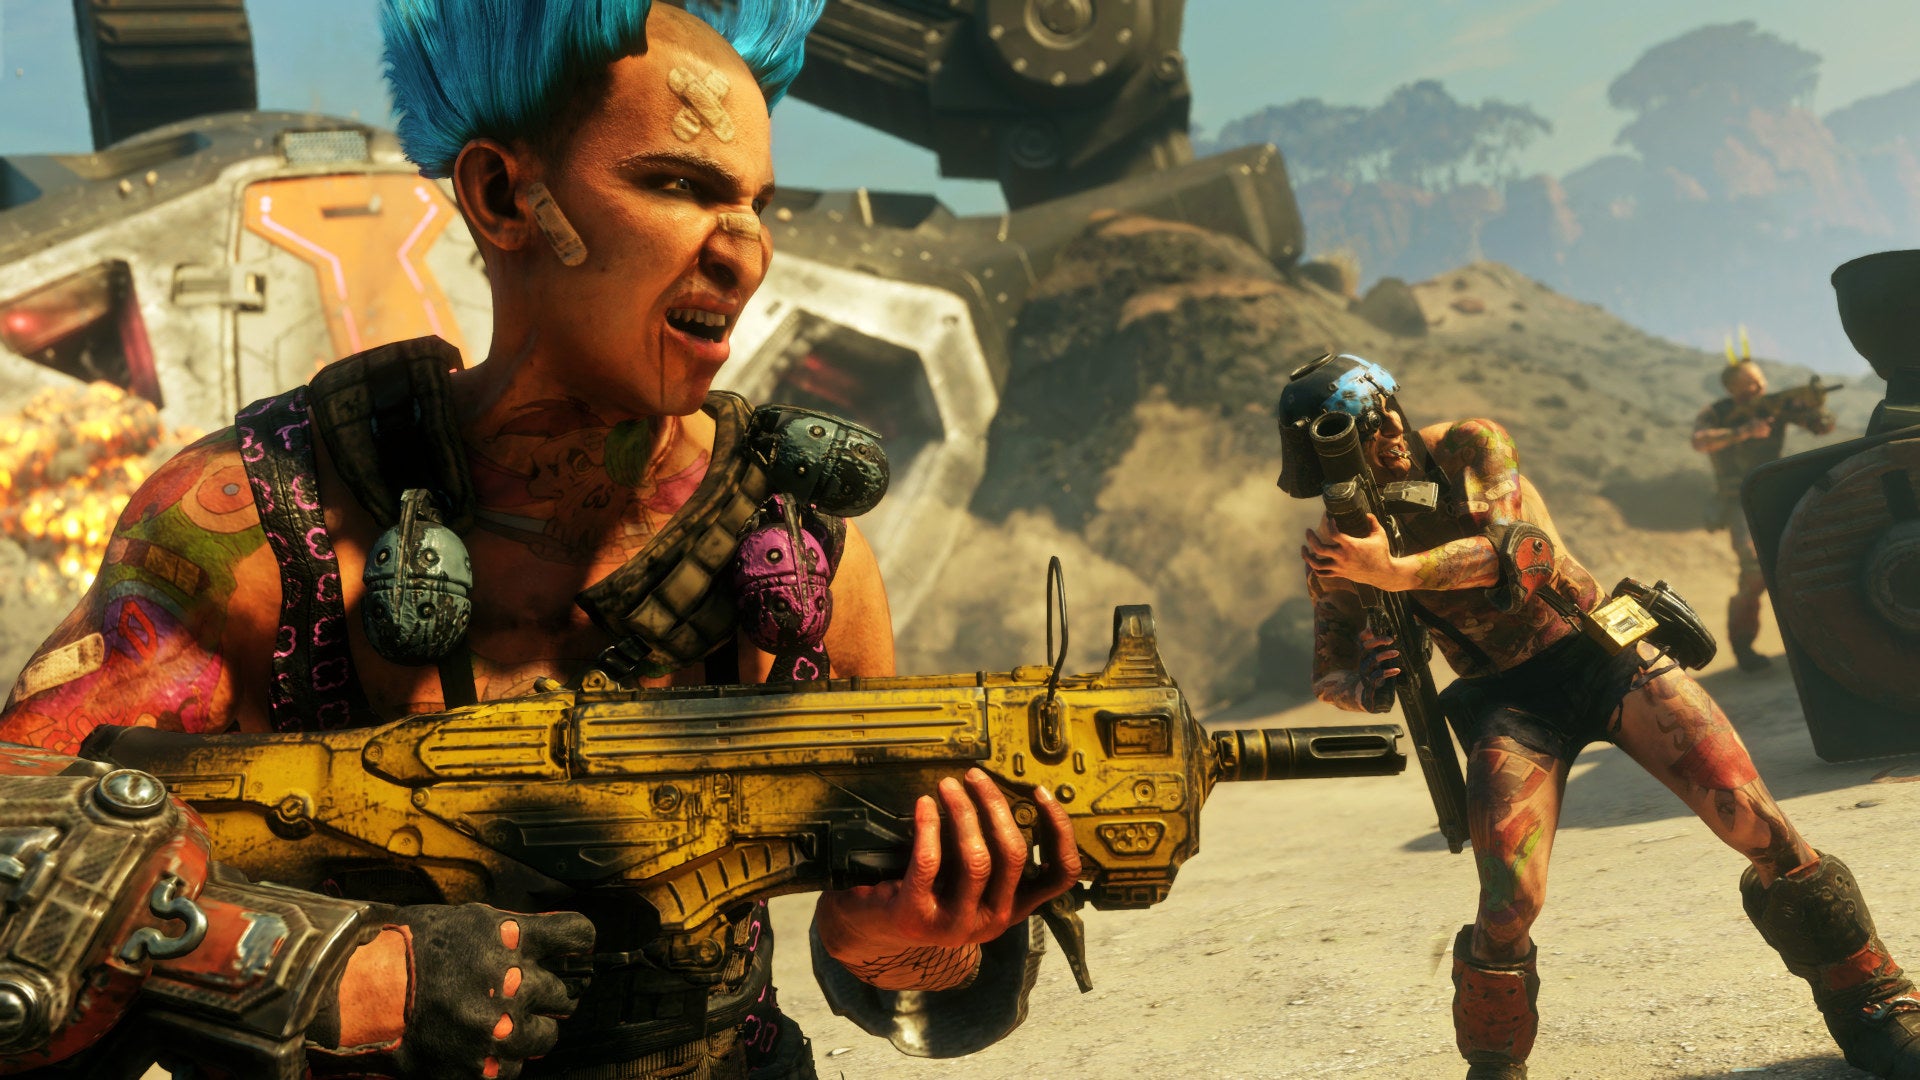 Rage 2 is free to play this week via the Epic Games Store